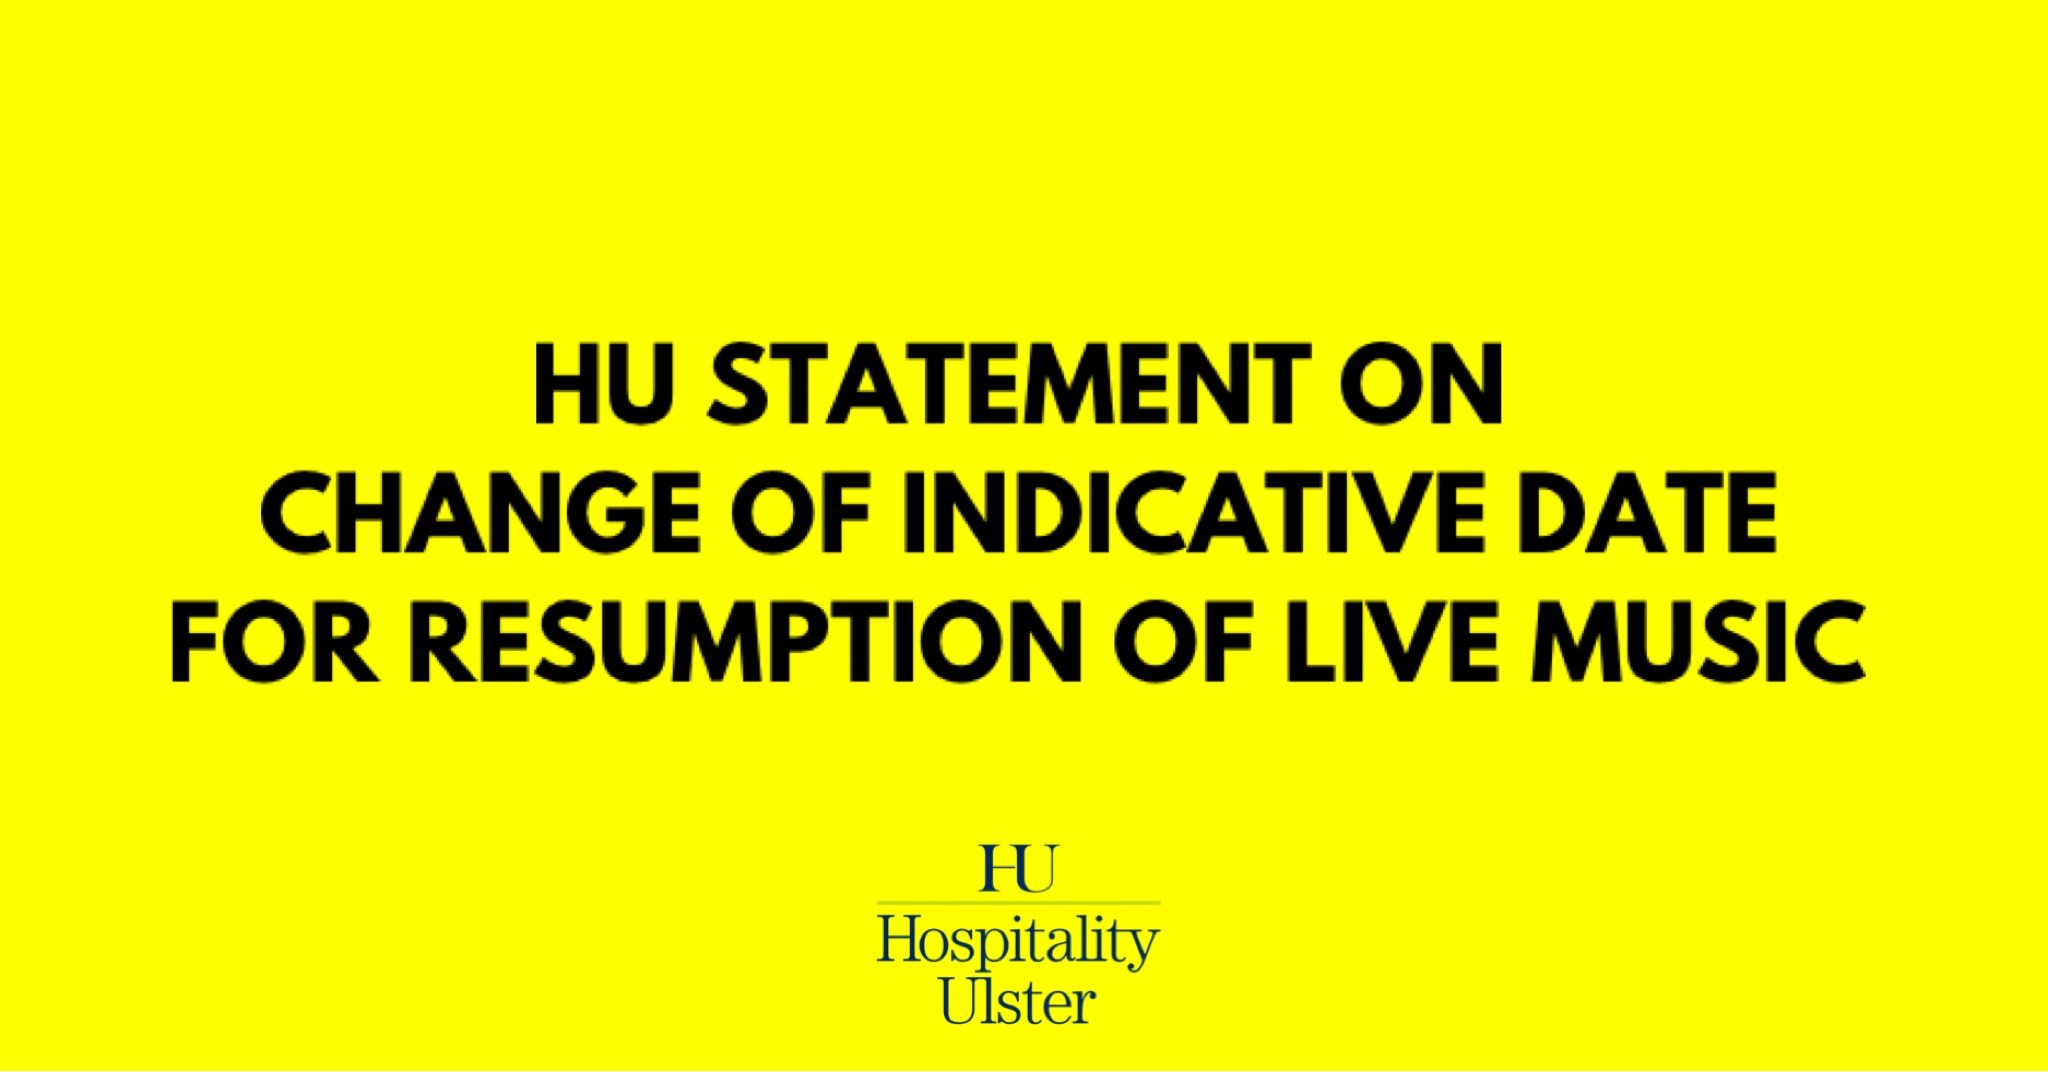 HU STATEMENT ON CHANGE OF INDICATIVE DATE FOR RESUMPTION OF LIVE MUSIC